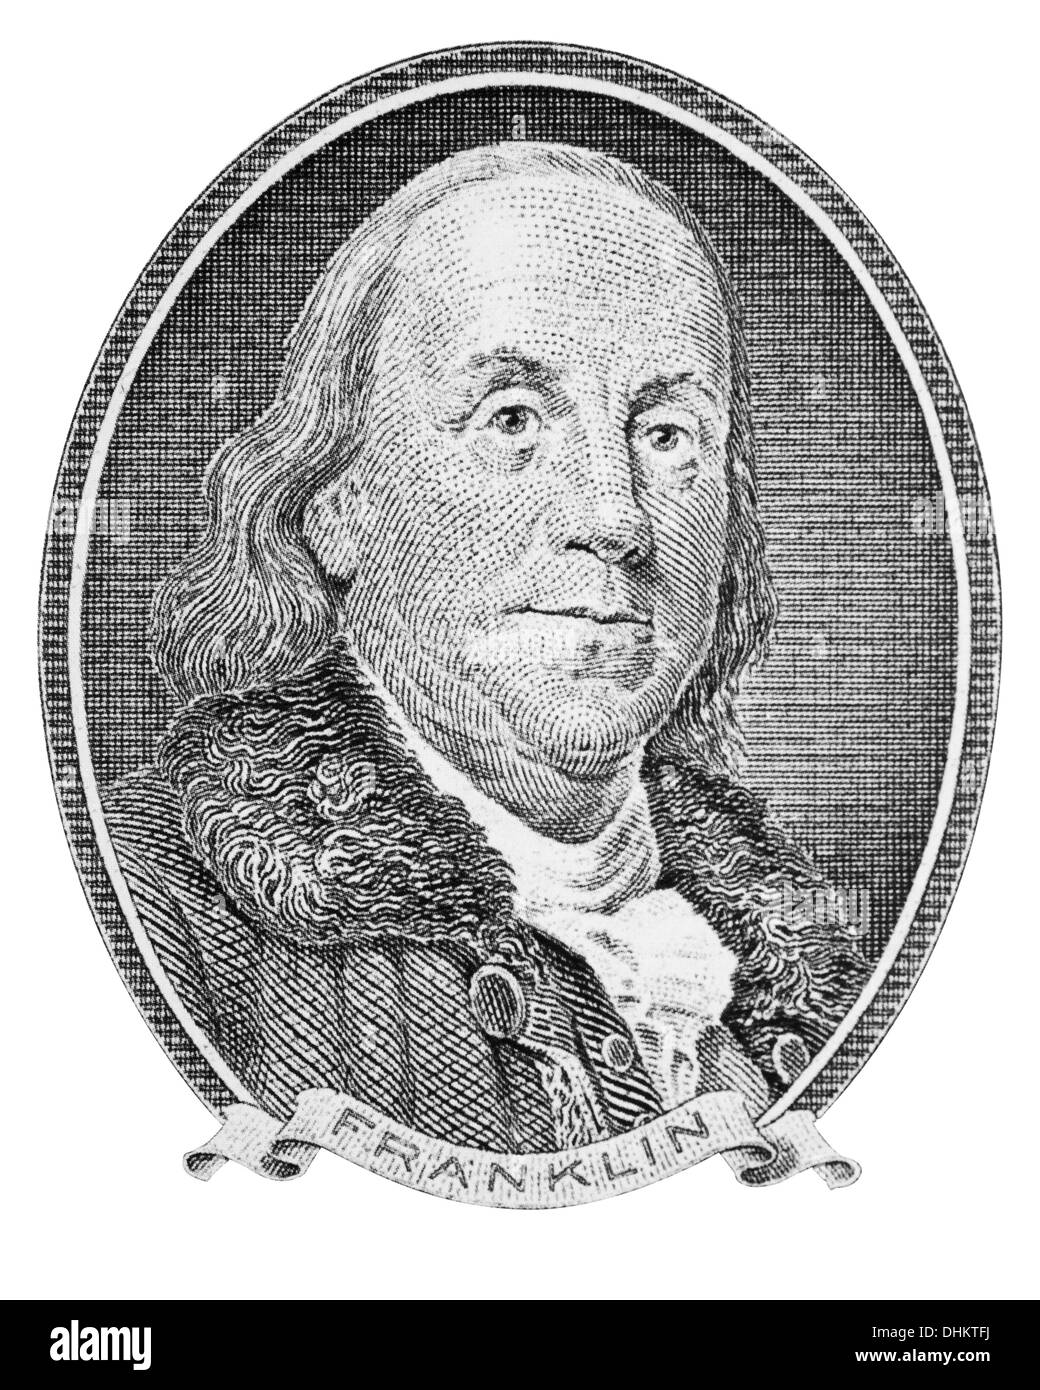 Benjamin Franklin portrait isolated on white background Stock Photo